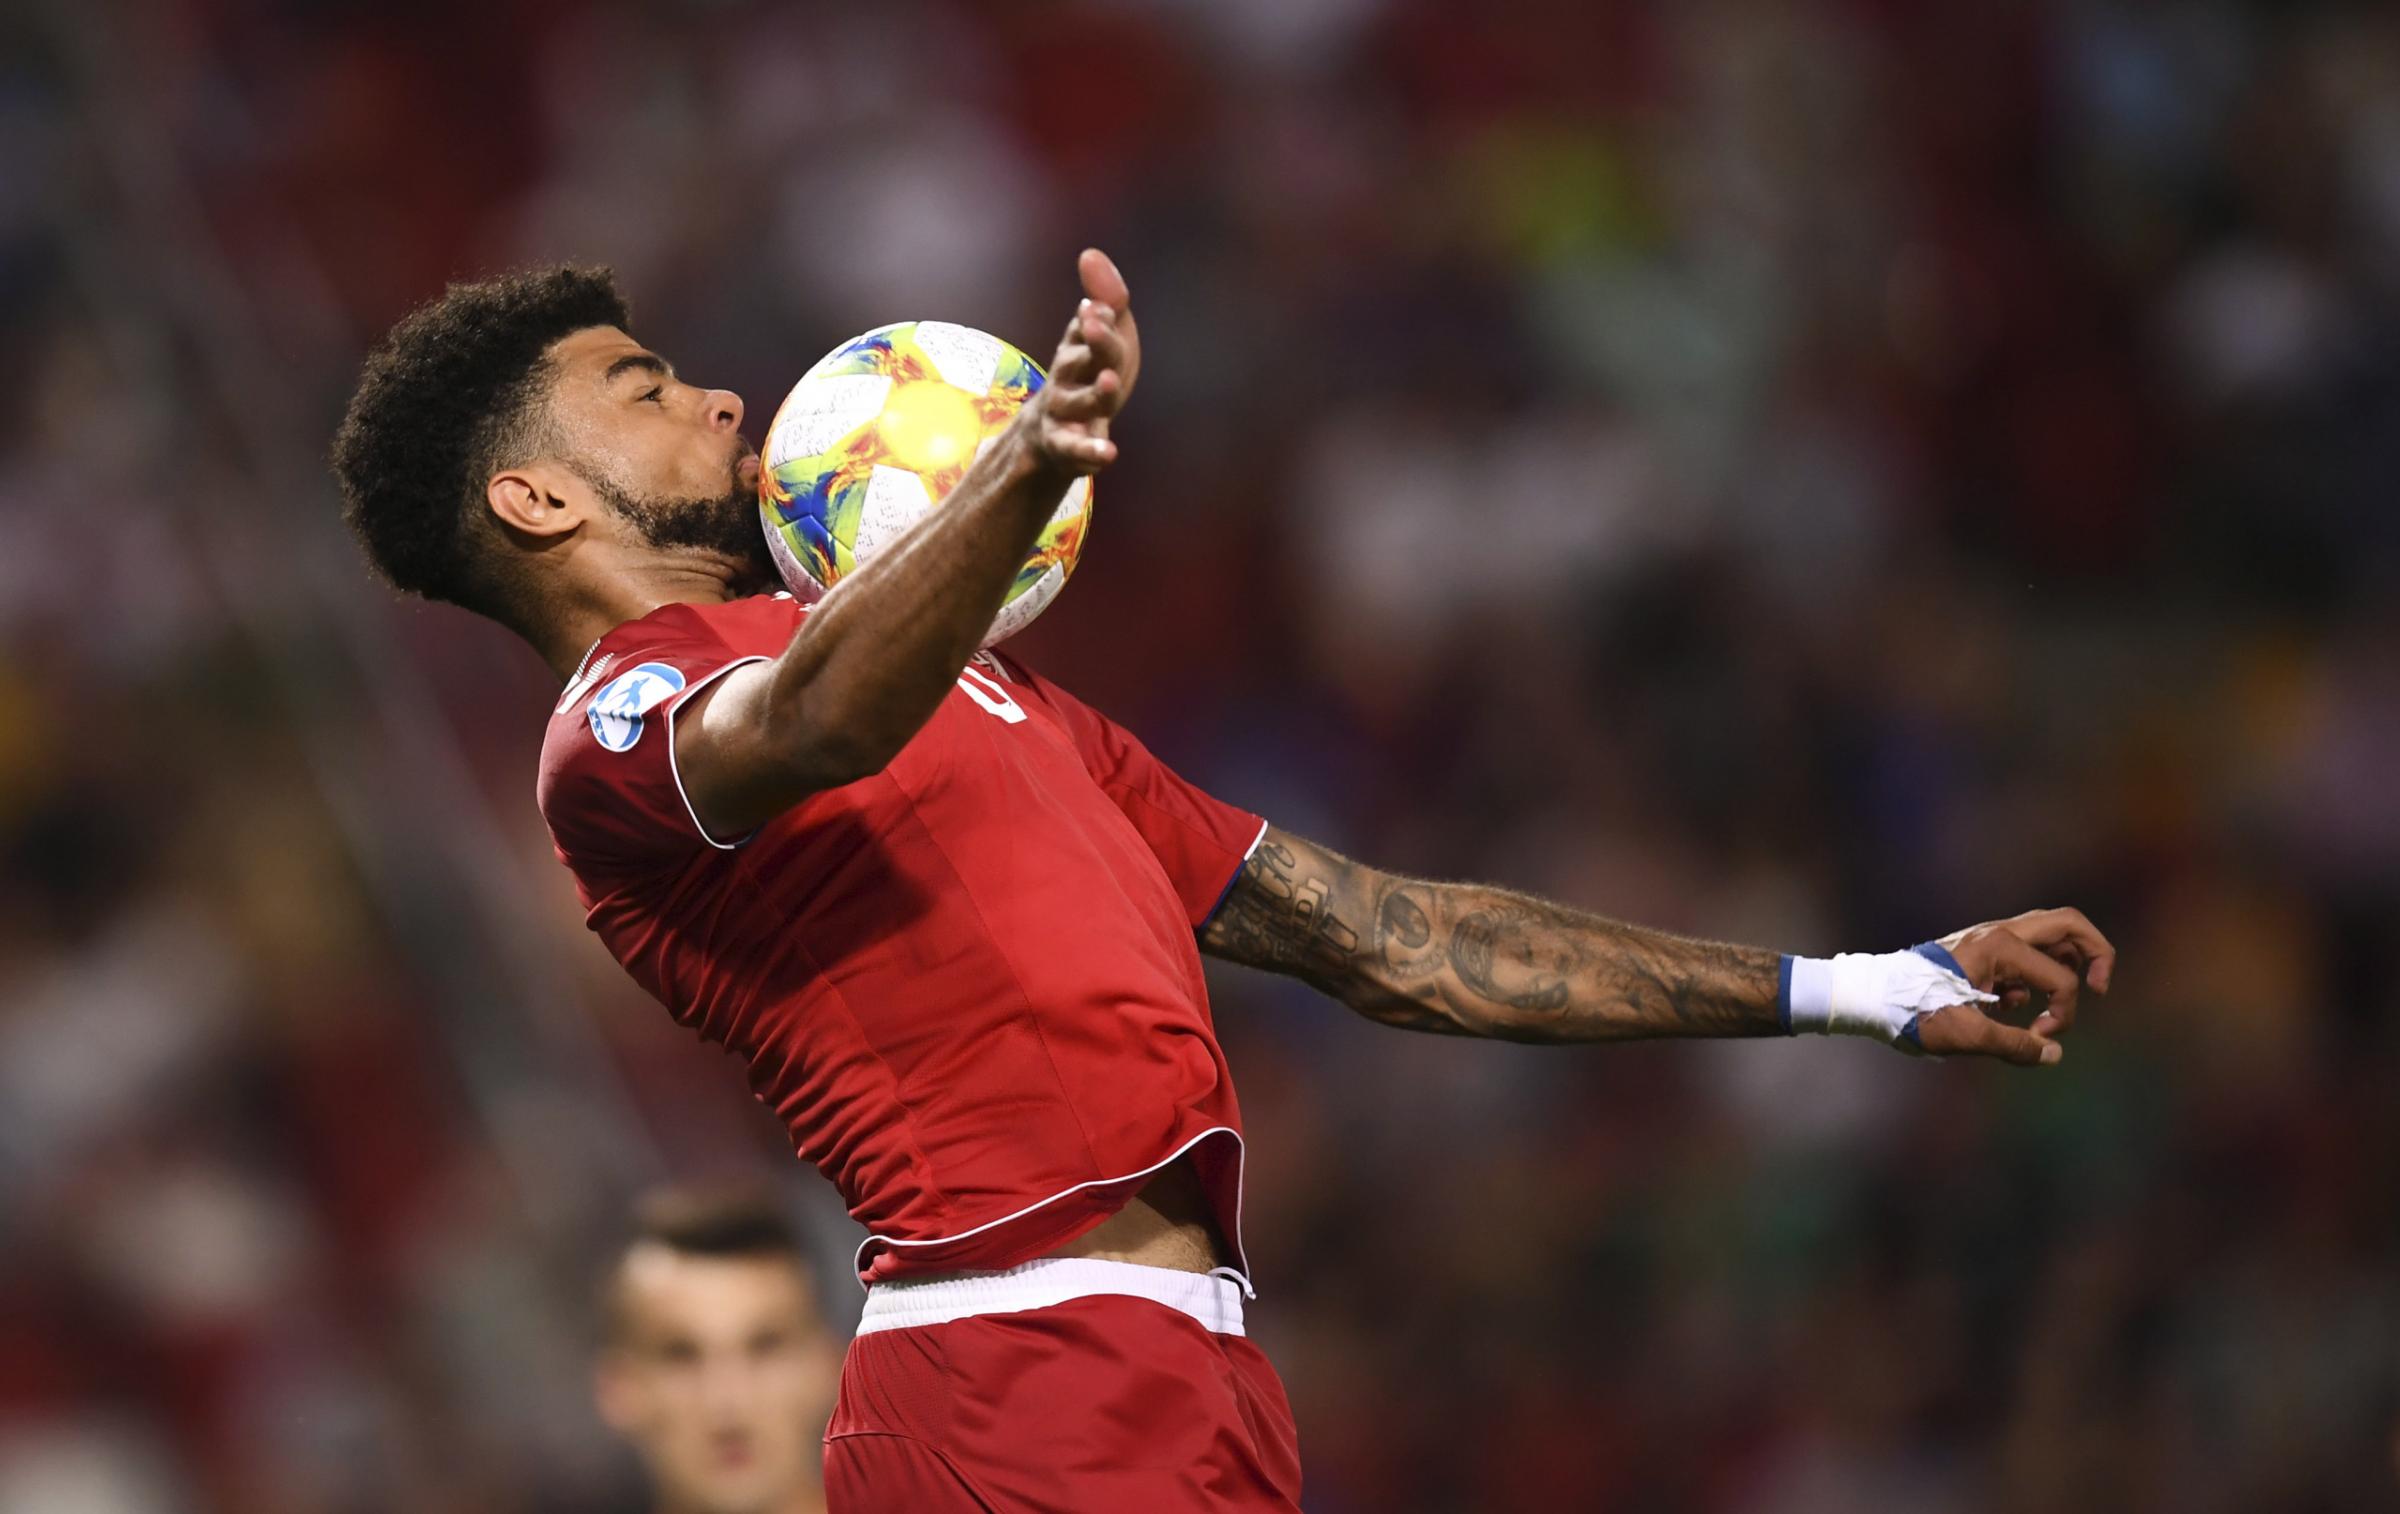 Billing helps Denmark overcome Austria to stay top of Nations League group